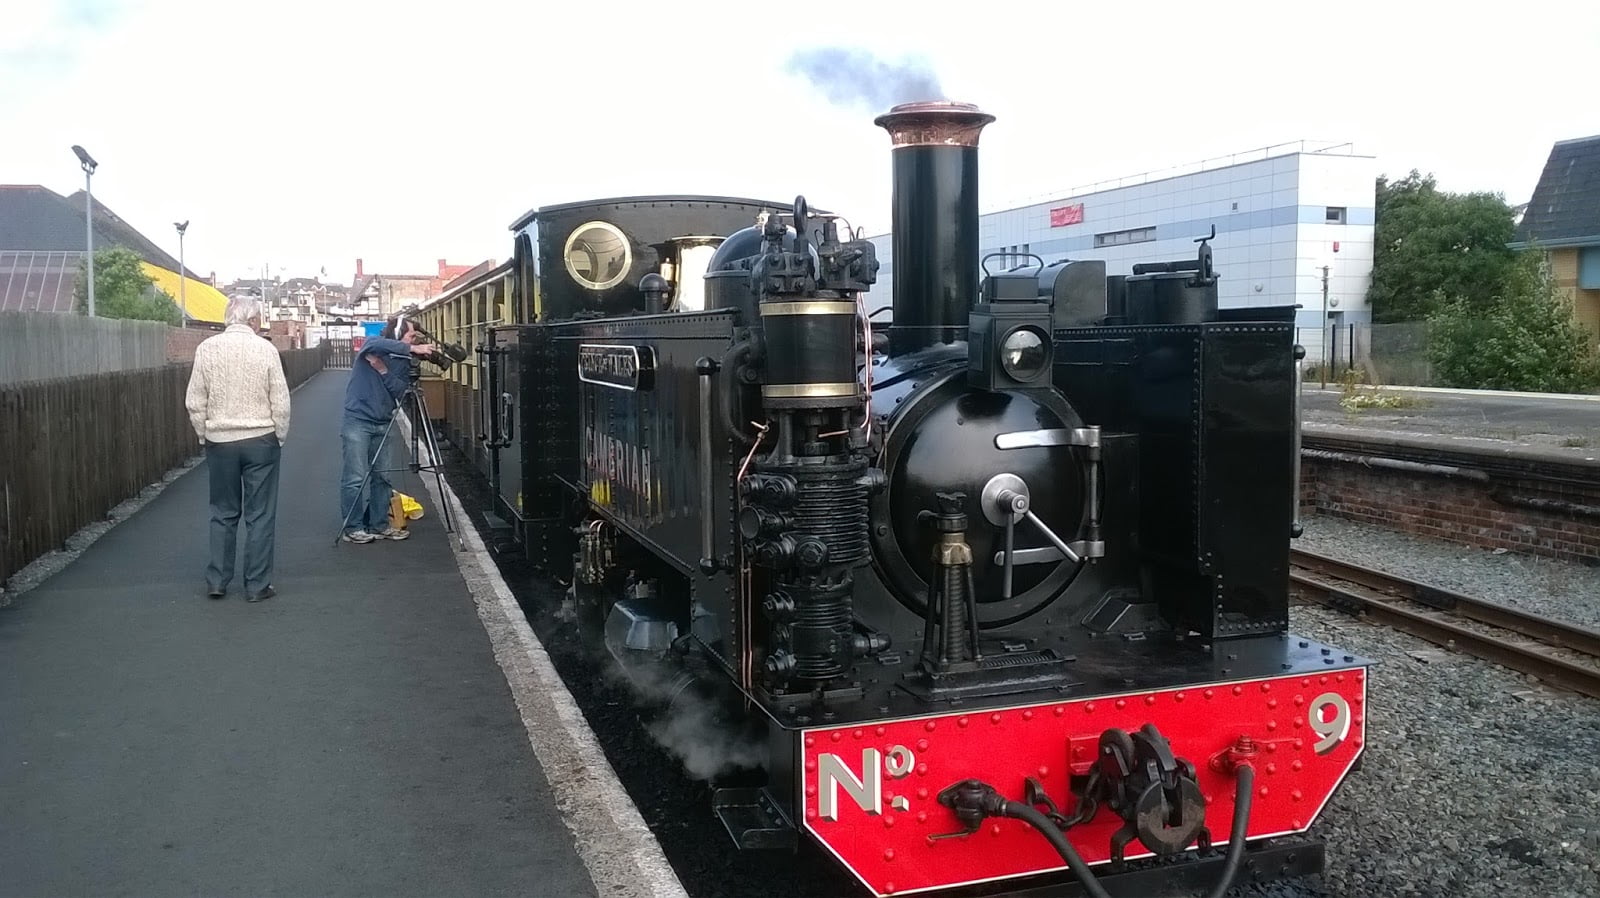 No. 9 Prince of Wales at Aberystwyth